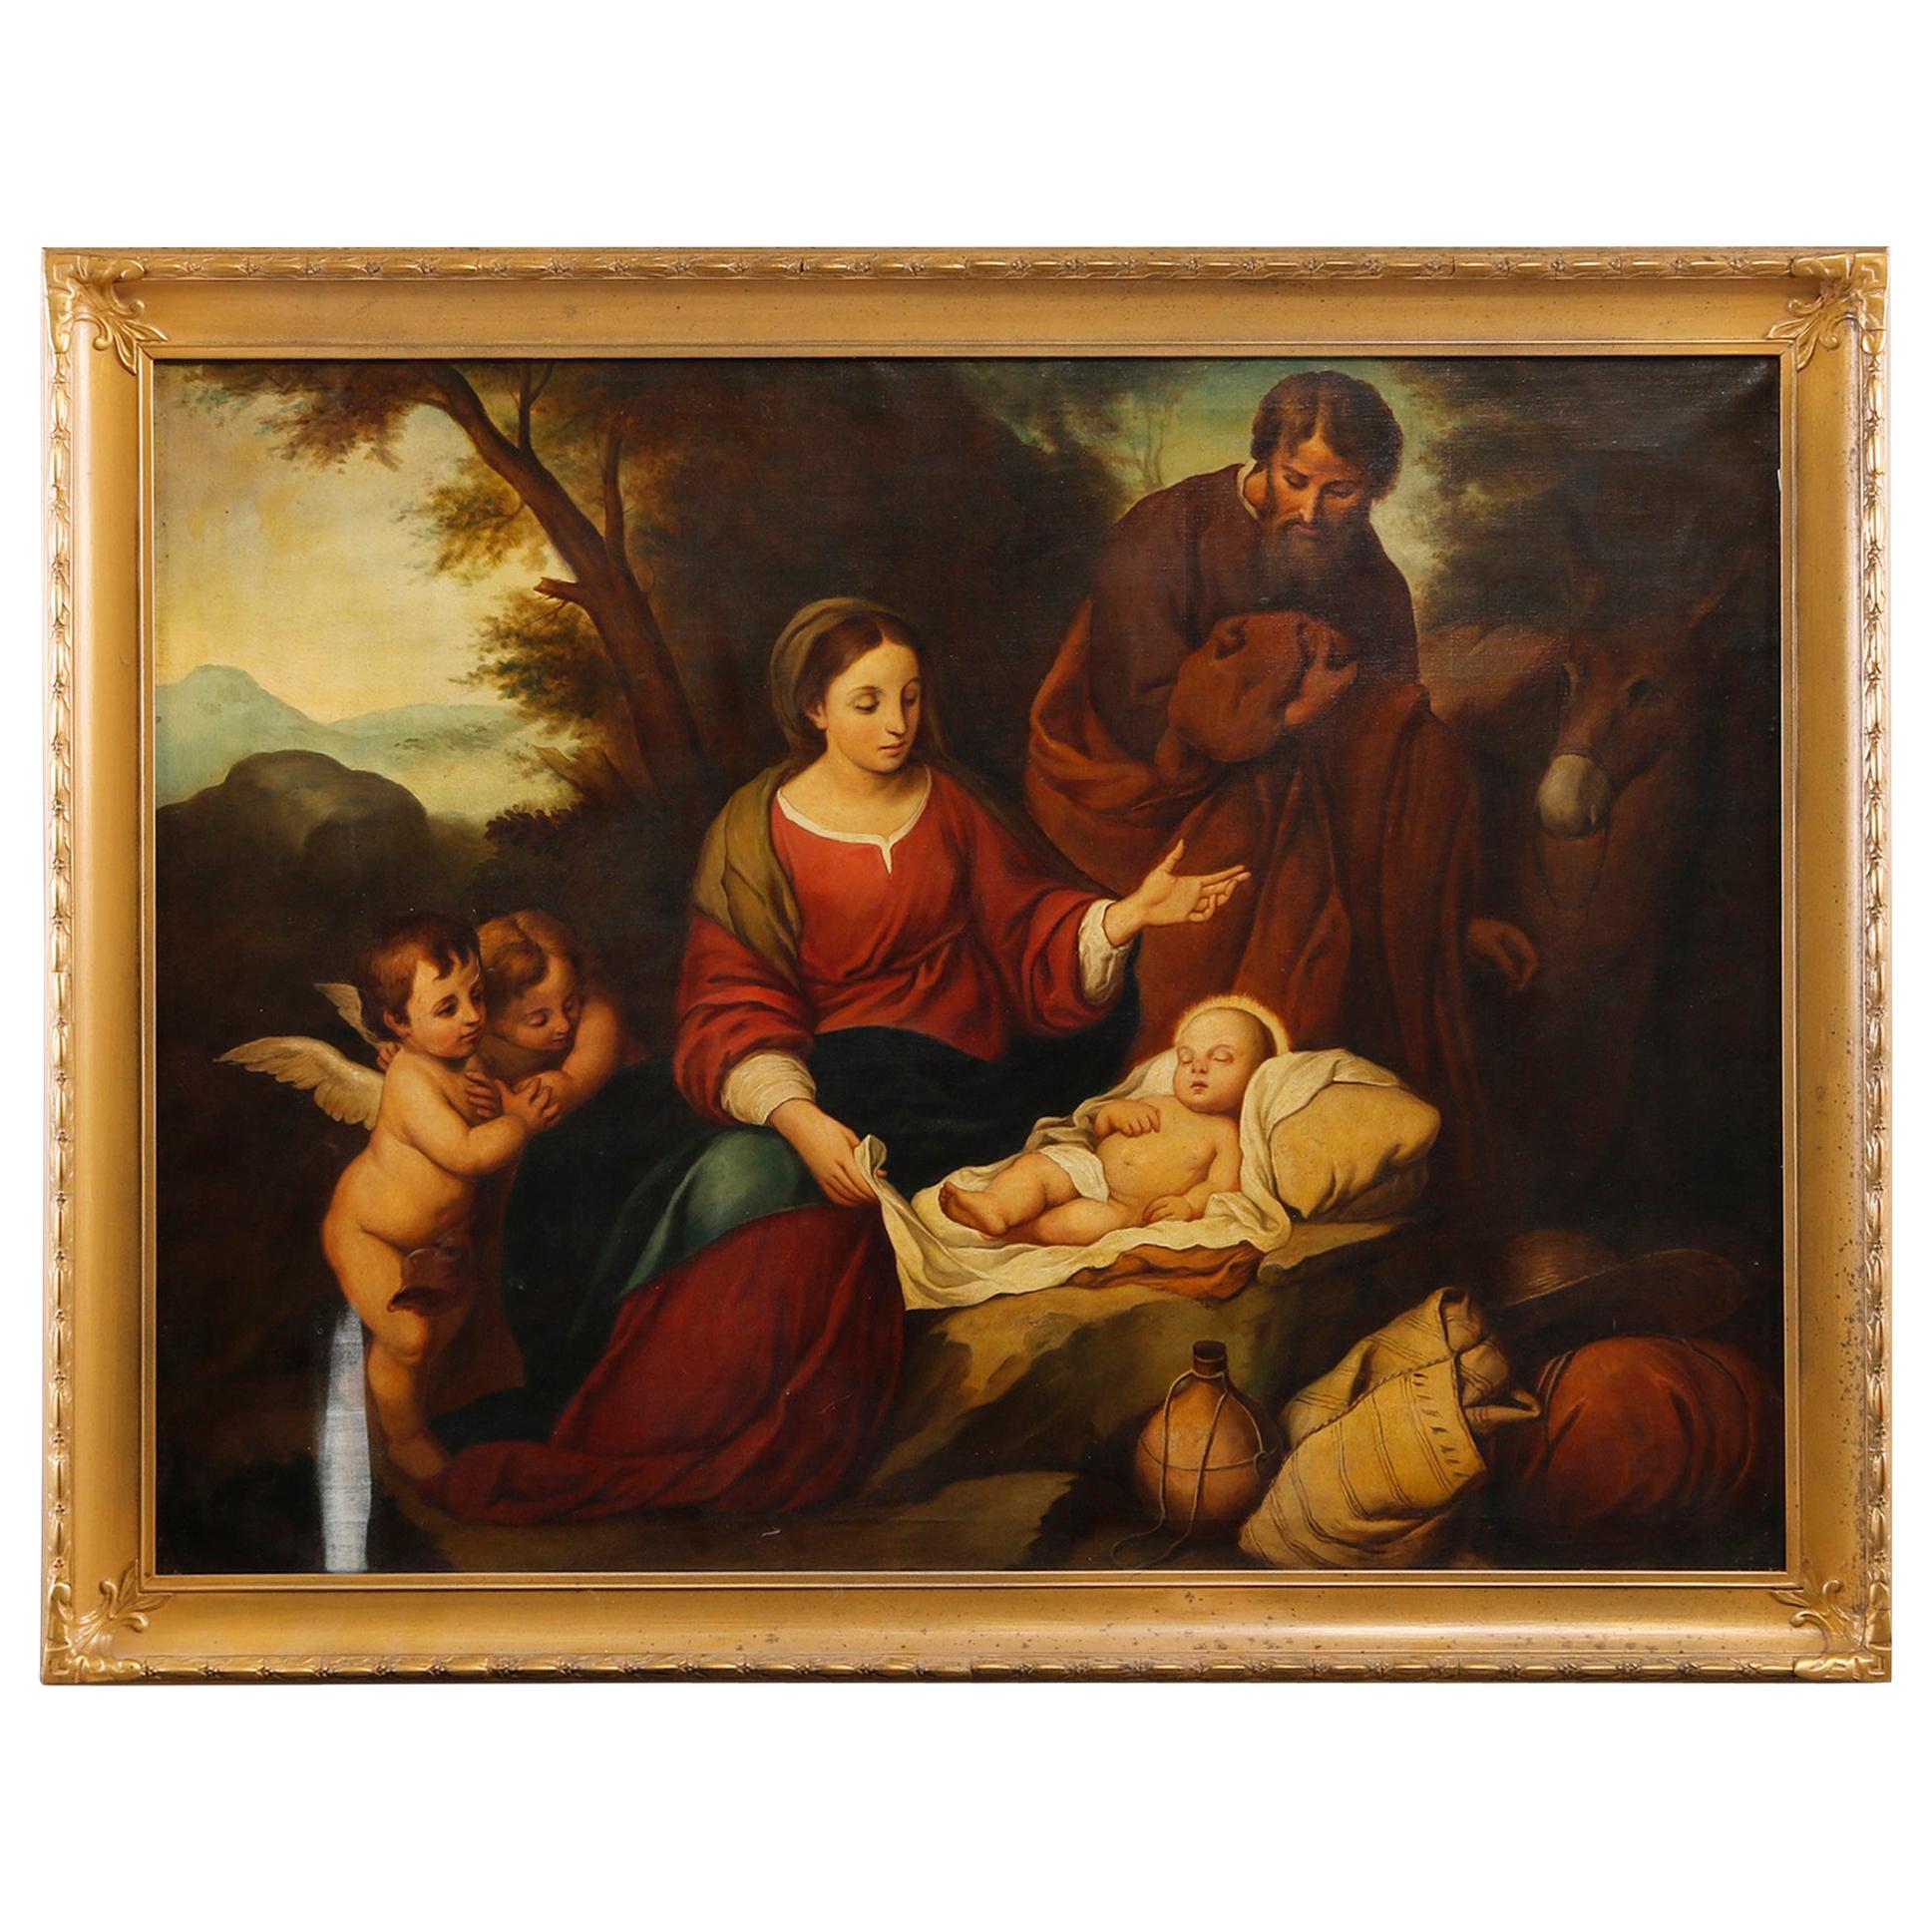 Antique Oil on Canvas Old Master Copy of Birth of Jesus Christ, 20th Century